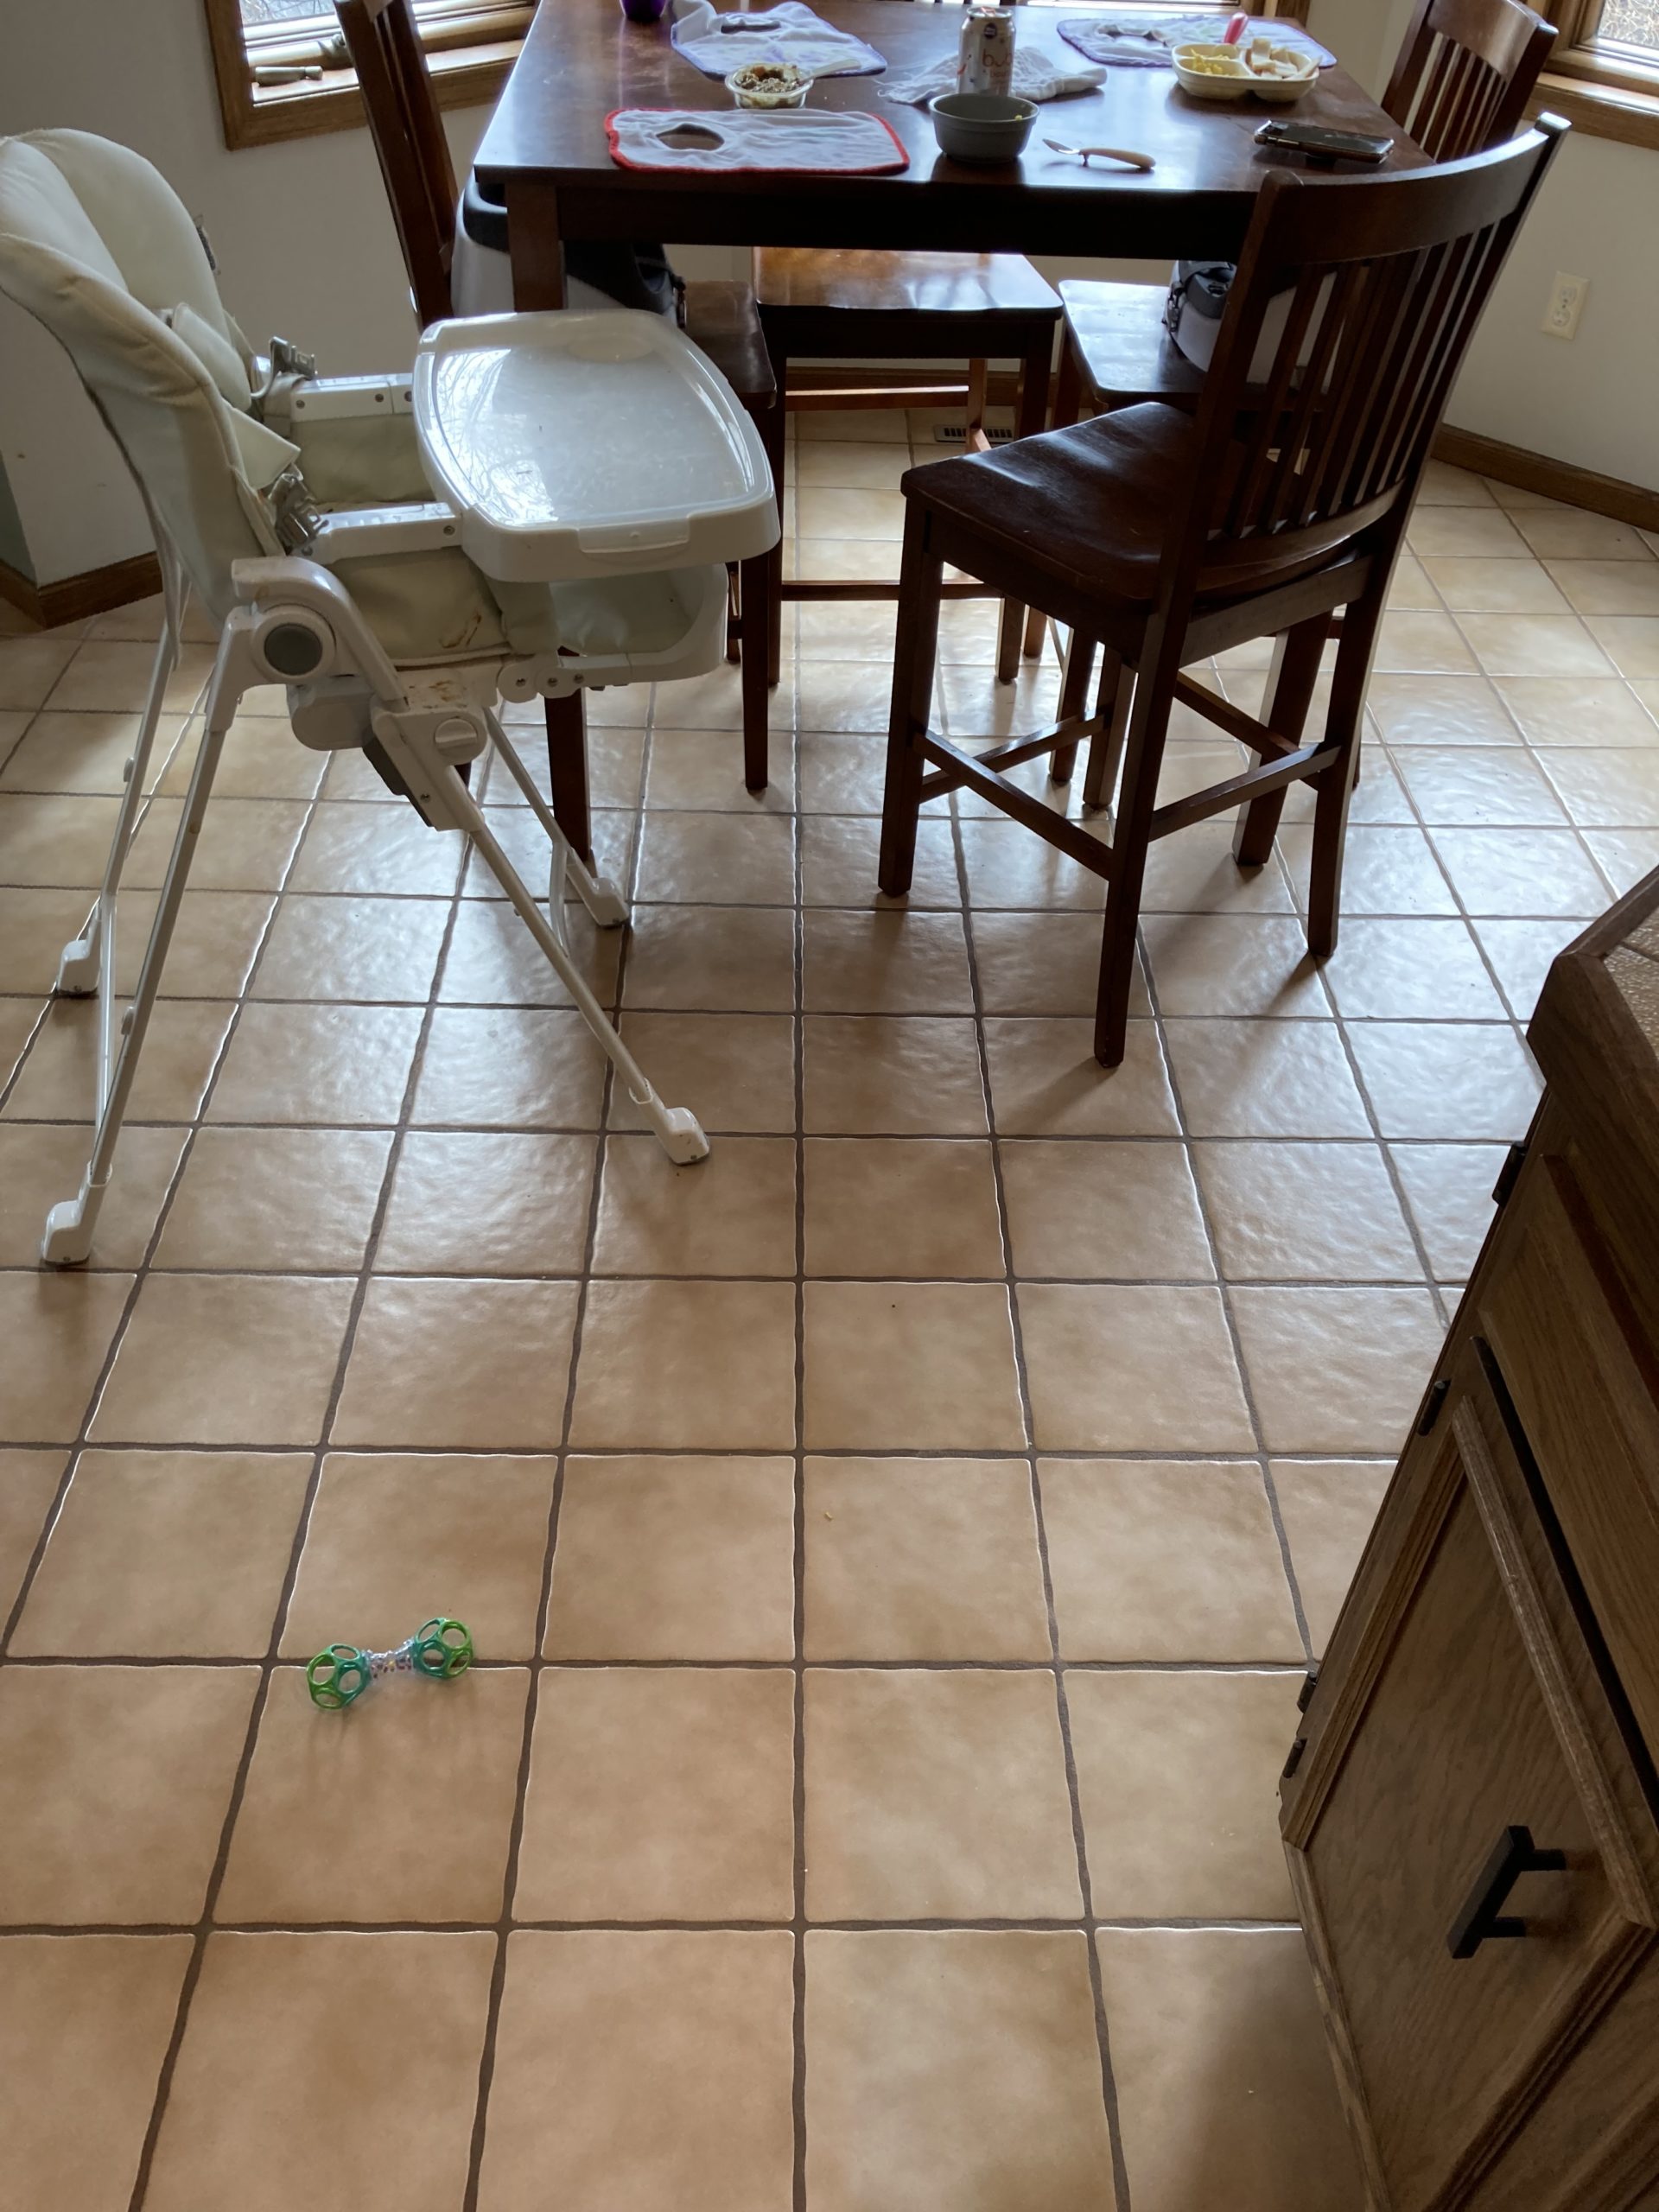 Before Picture Of The Dining Room Tile Floor